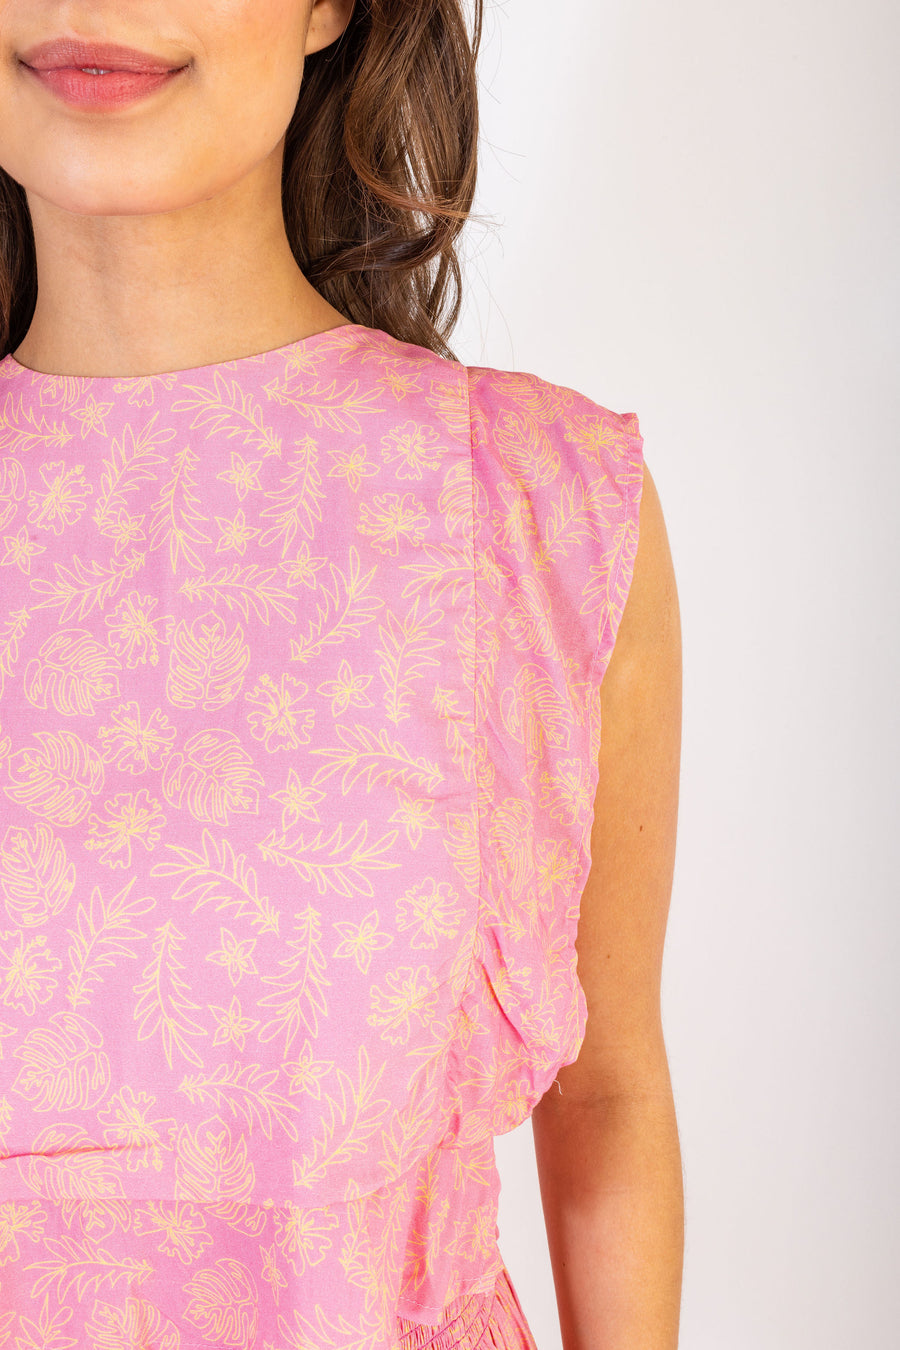 Wren Top Pink Surf Toile *Limited*Edition*